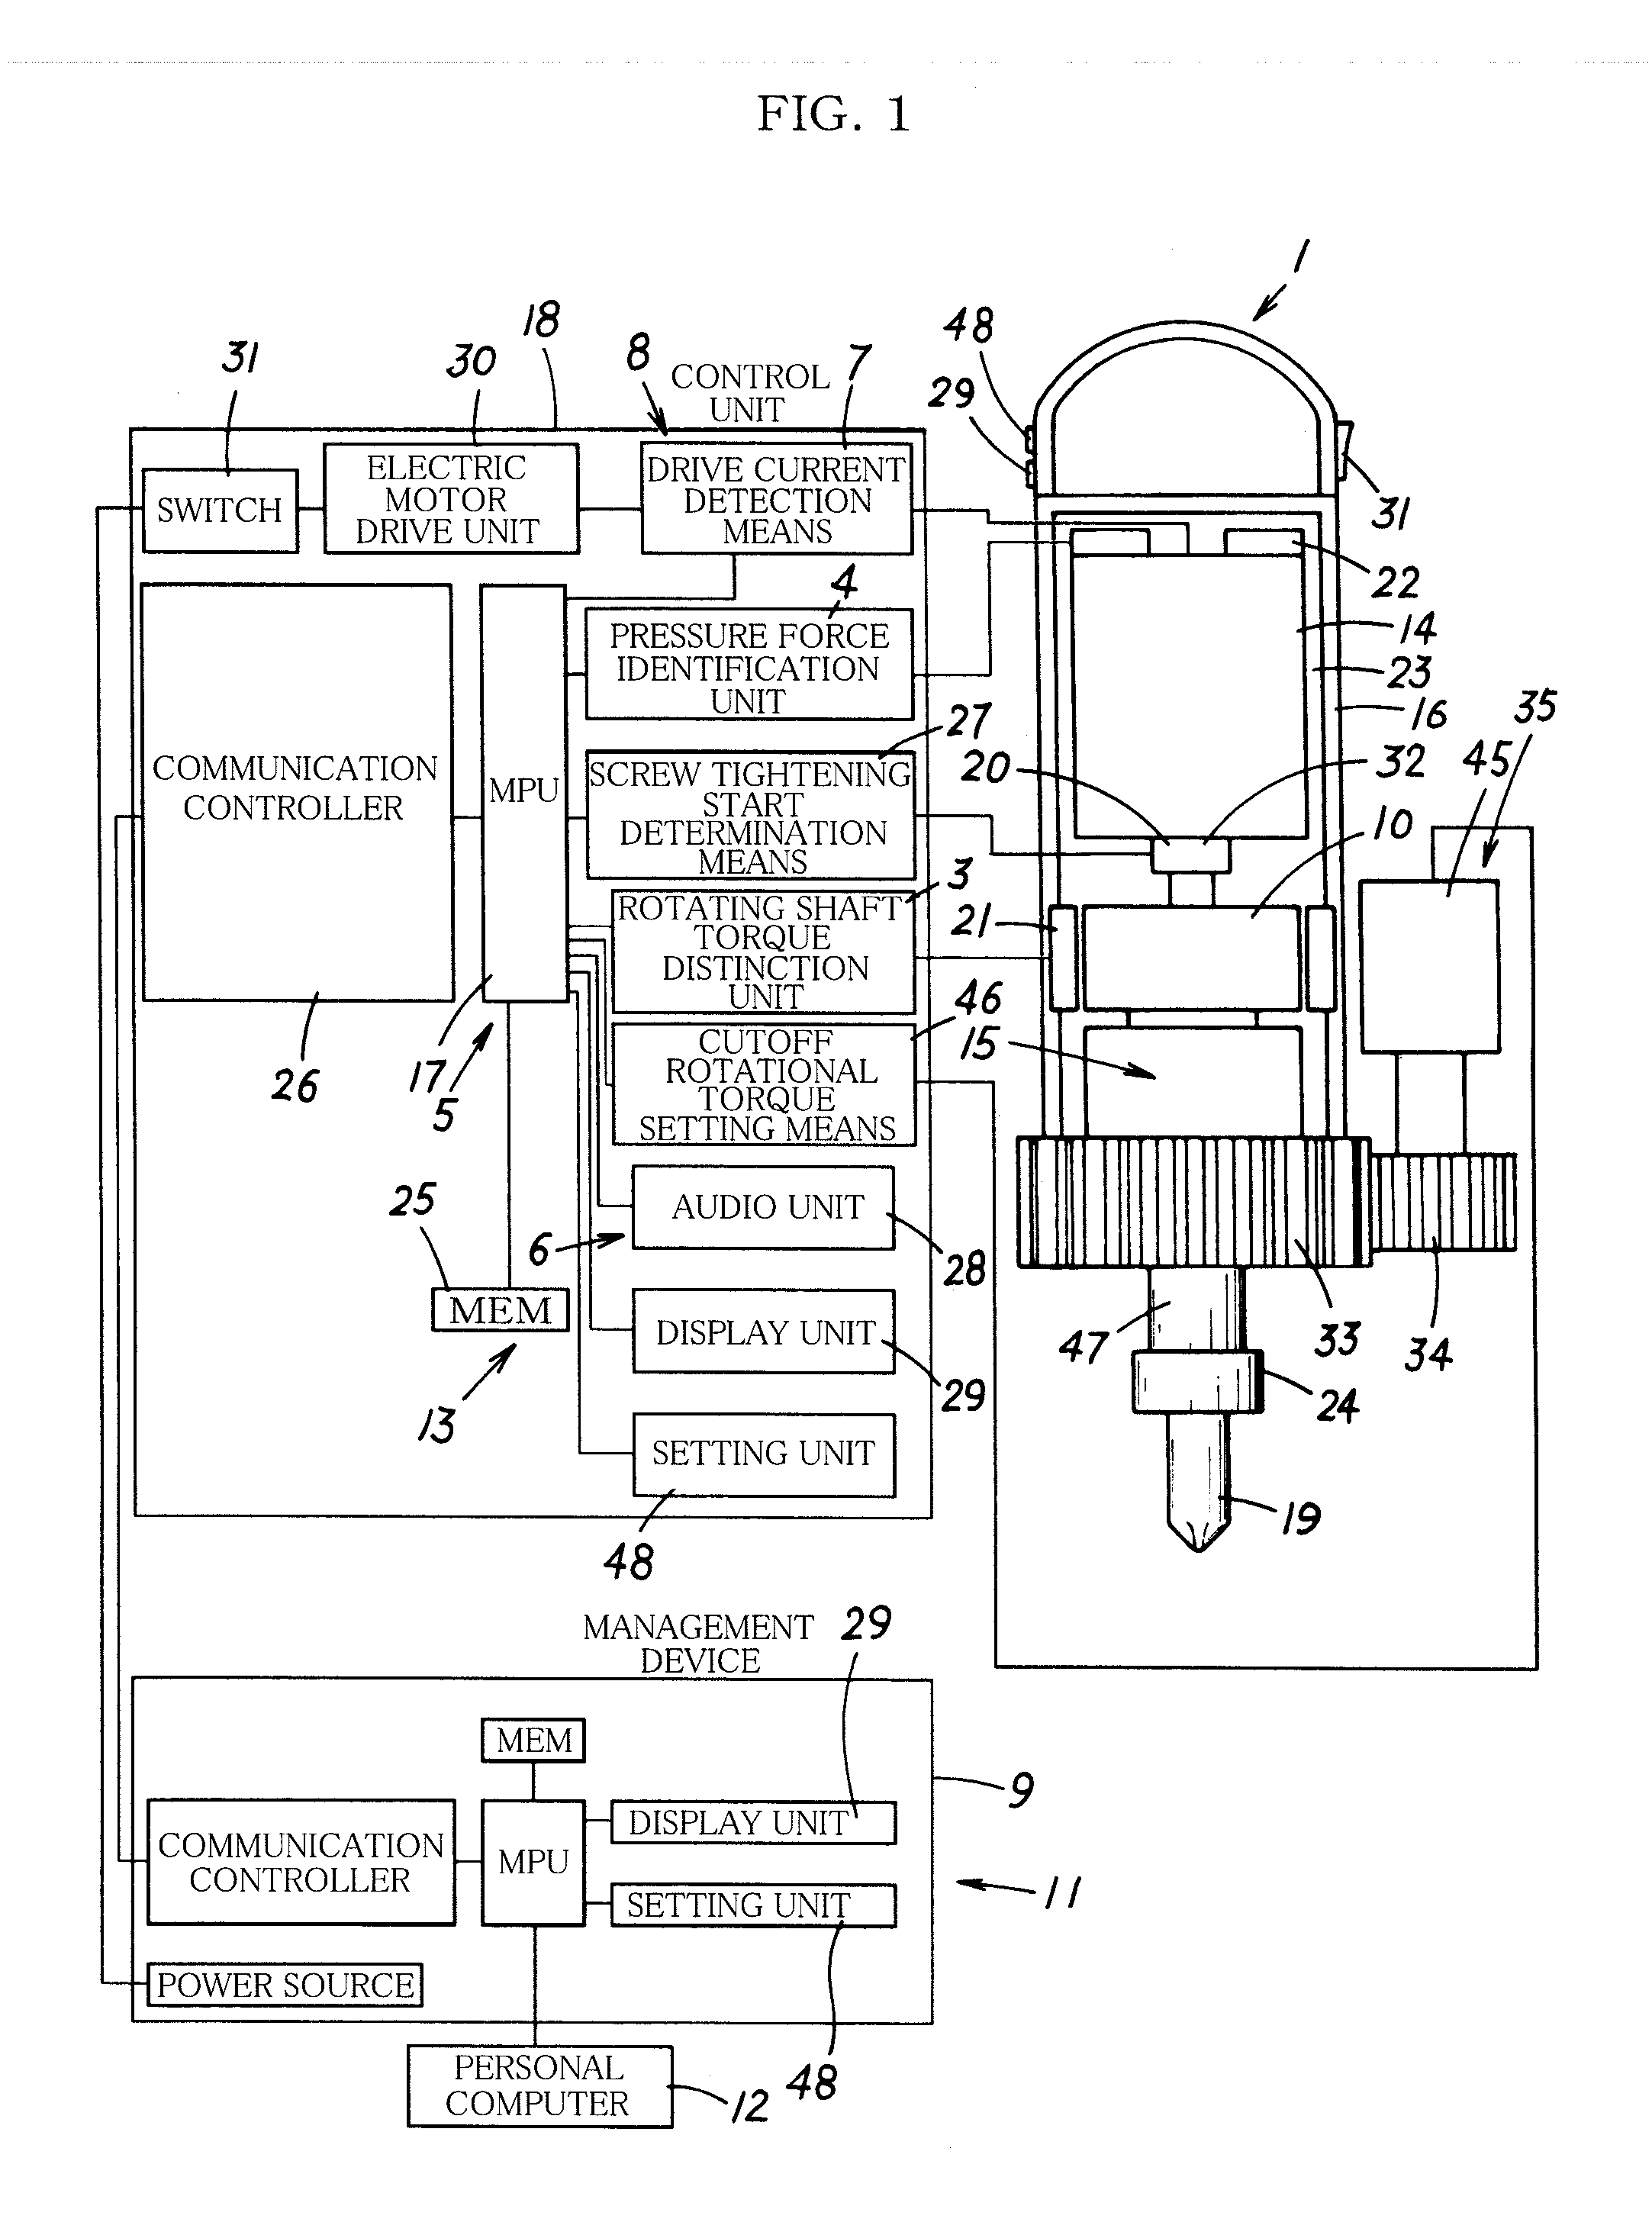 Screw tightening diagnostic device and electric driver